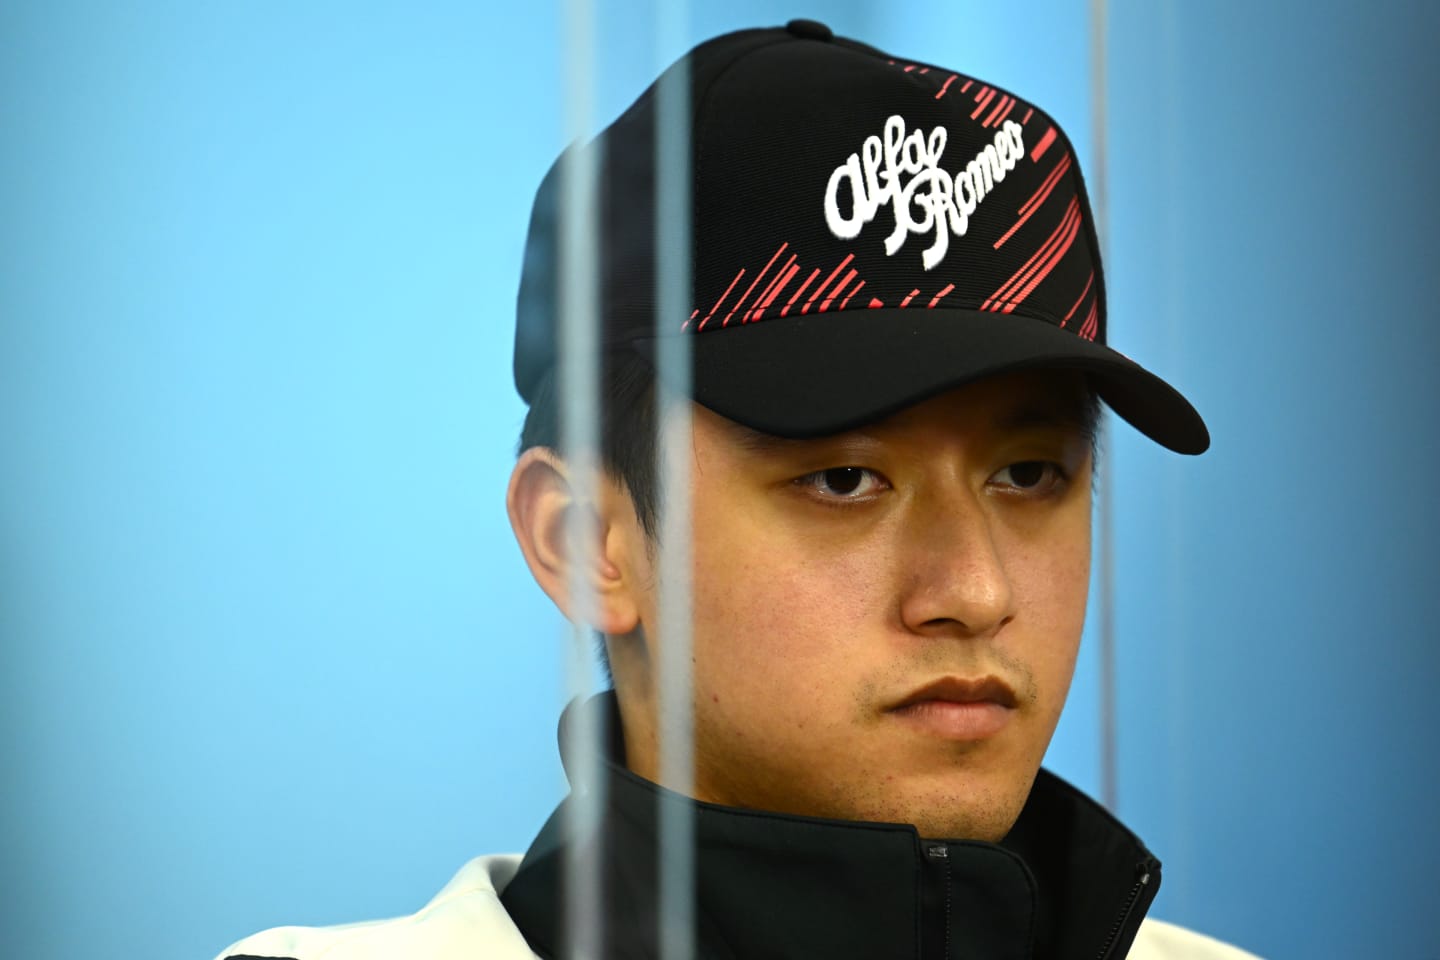 SUZUKA, JAPAN - OCTOBER 06: Zhou Guanyu of China and Alfa Romeo F1 attends the Drivers Press Conference during previews ahead of the F1 Grand Prix of Japan at Suzuka International Racing Course on October 06, 2022 in Suzuka, Japan. (Photo by Clive Mason/Getty Images)